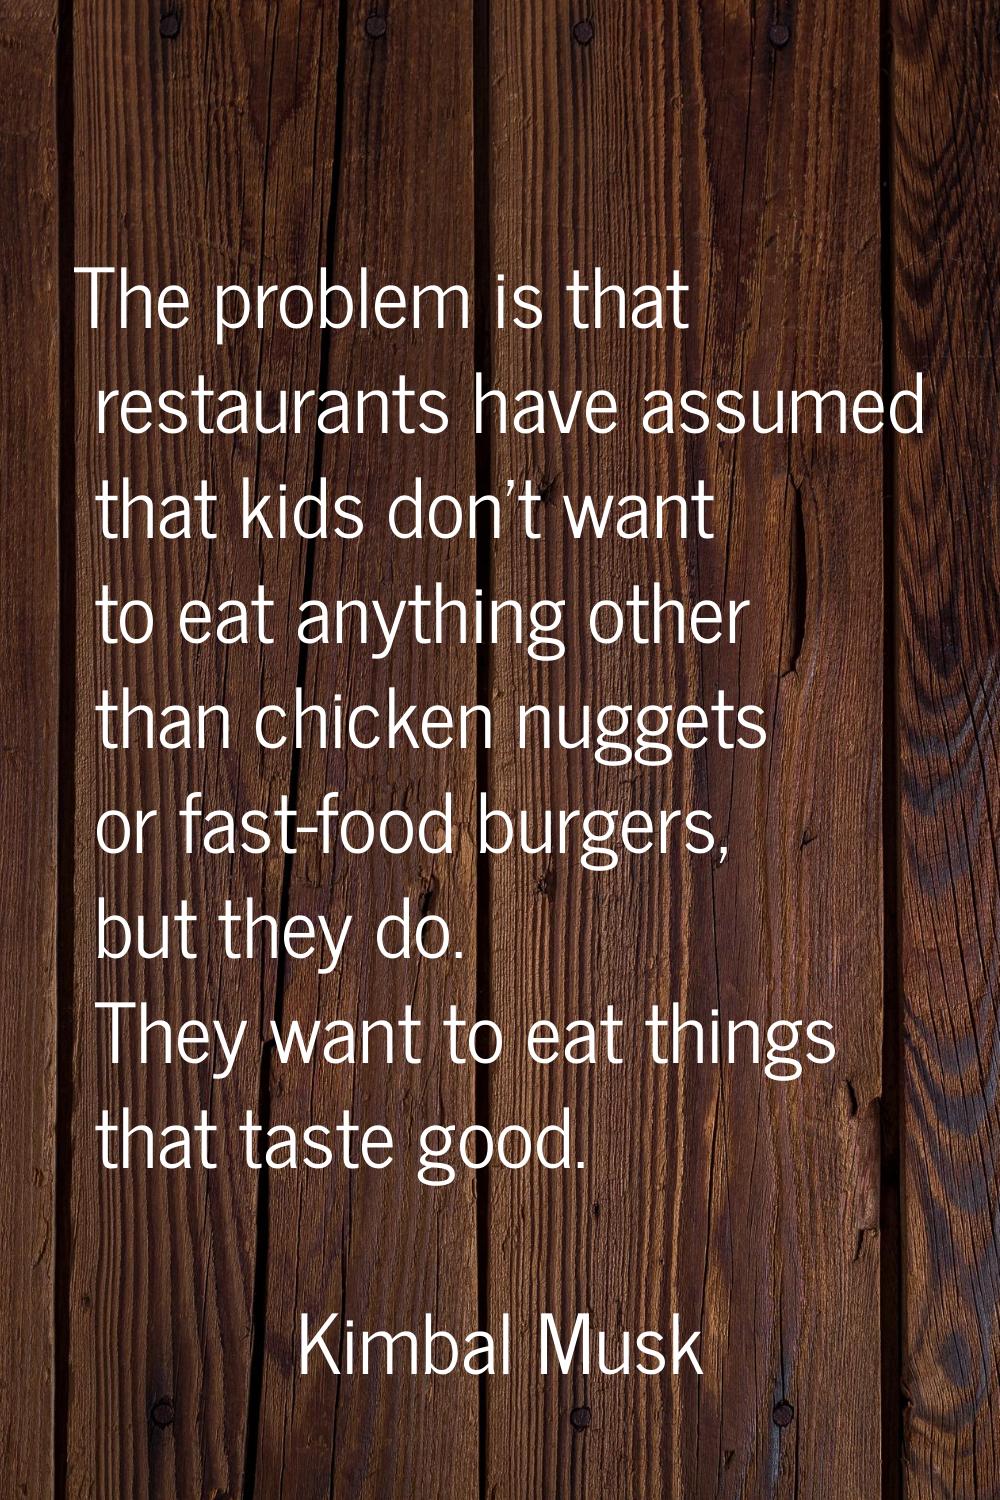 The problem is that restaurants have assumed that kids don't want to eat anything other than chicke